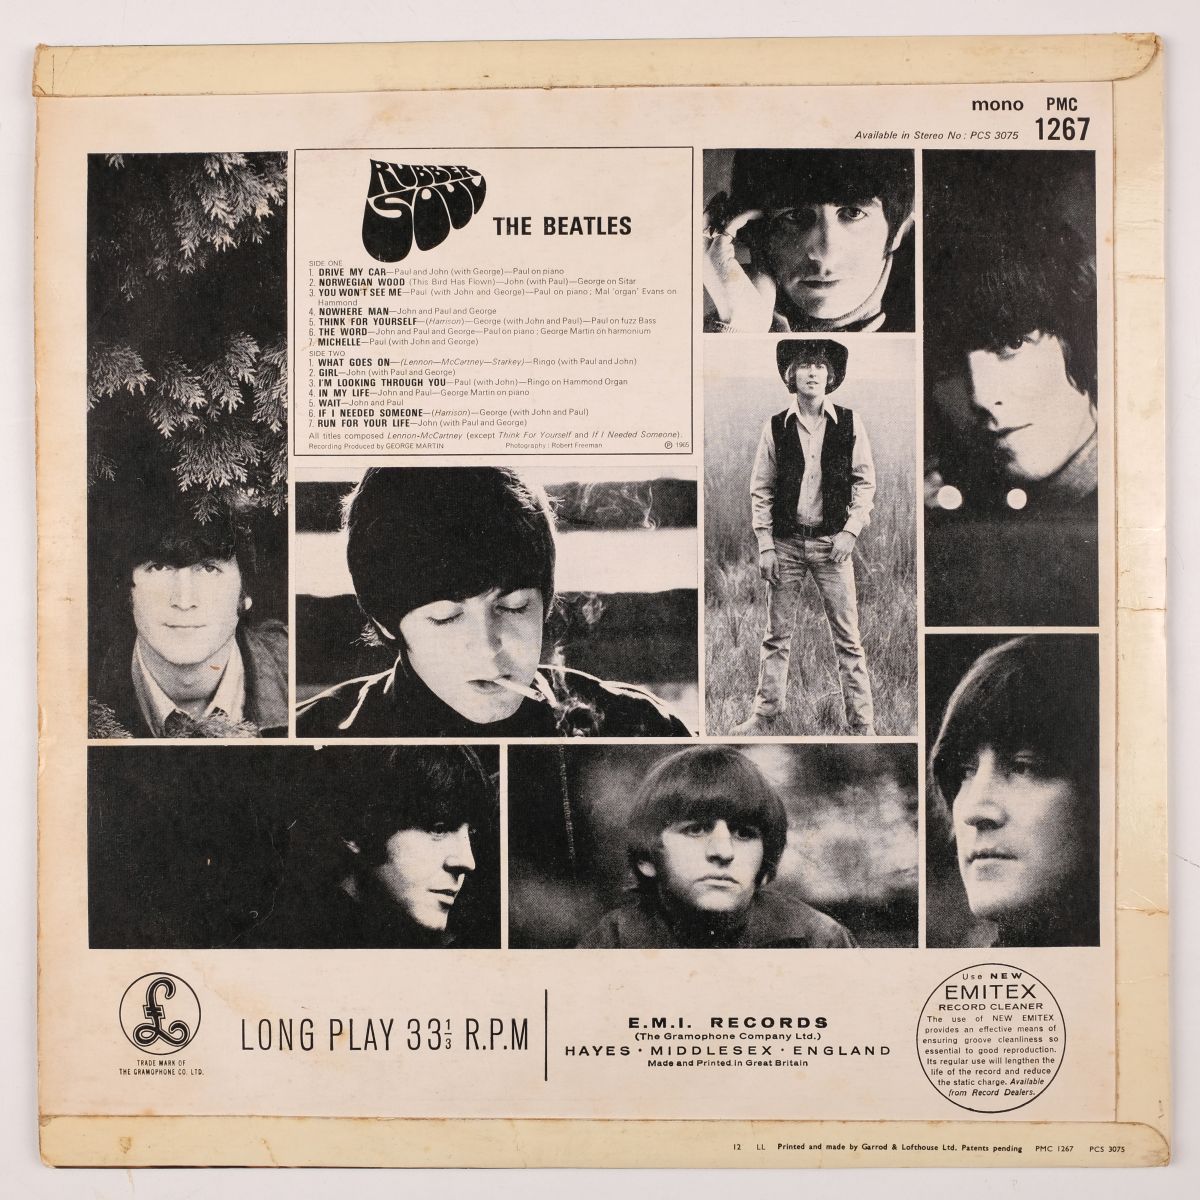 Lot 405 - The Beatles. Collection of original Beatles